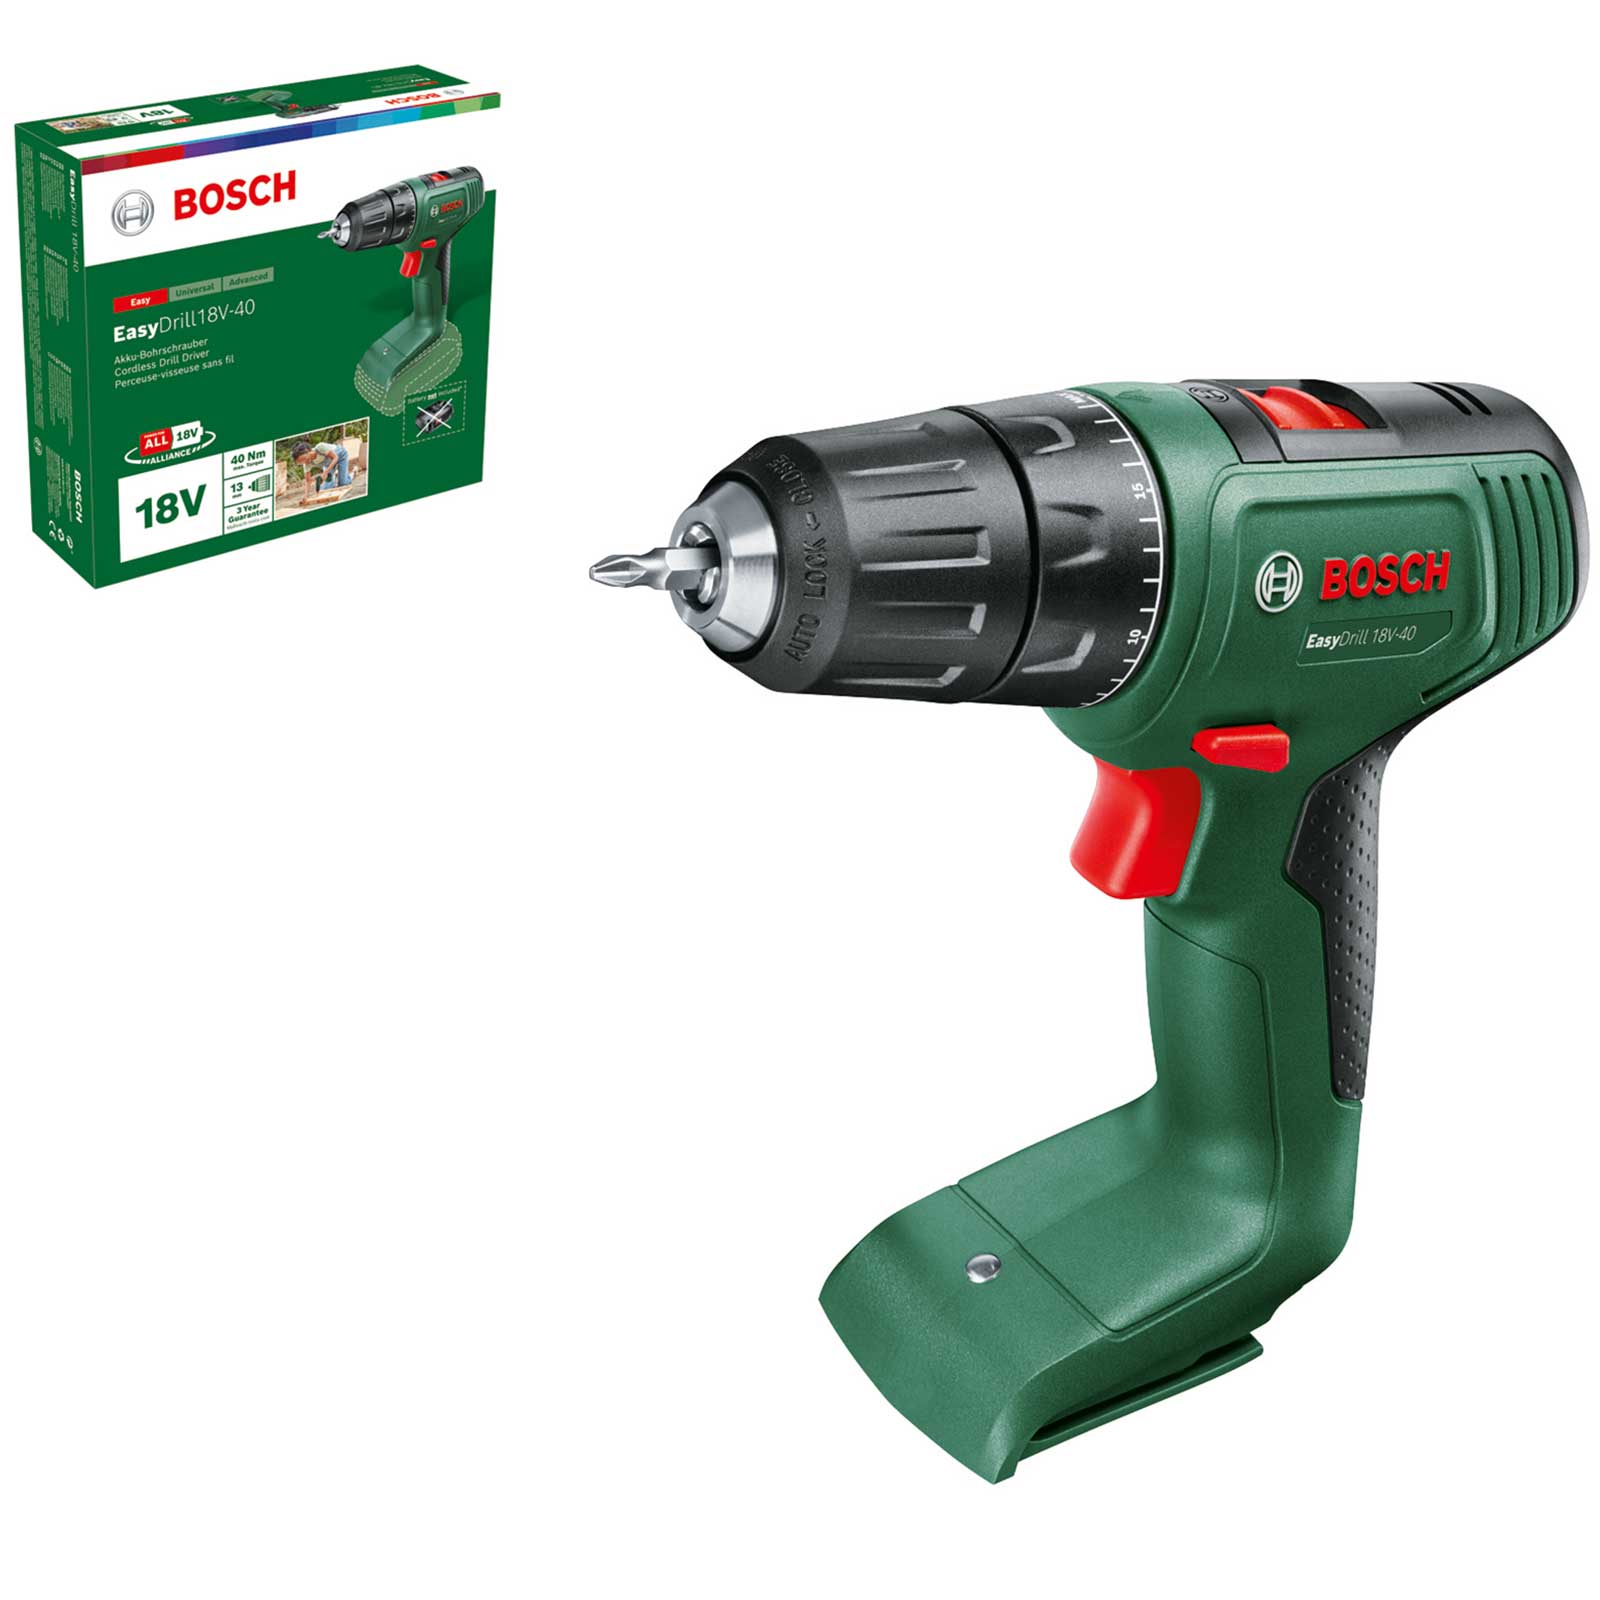 Image of Bosch EASYDRILL 18V-40 18v Cordless Drill Driver No Batteries No Charger No Case